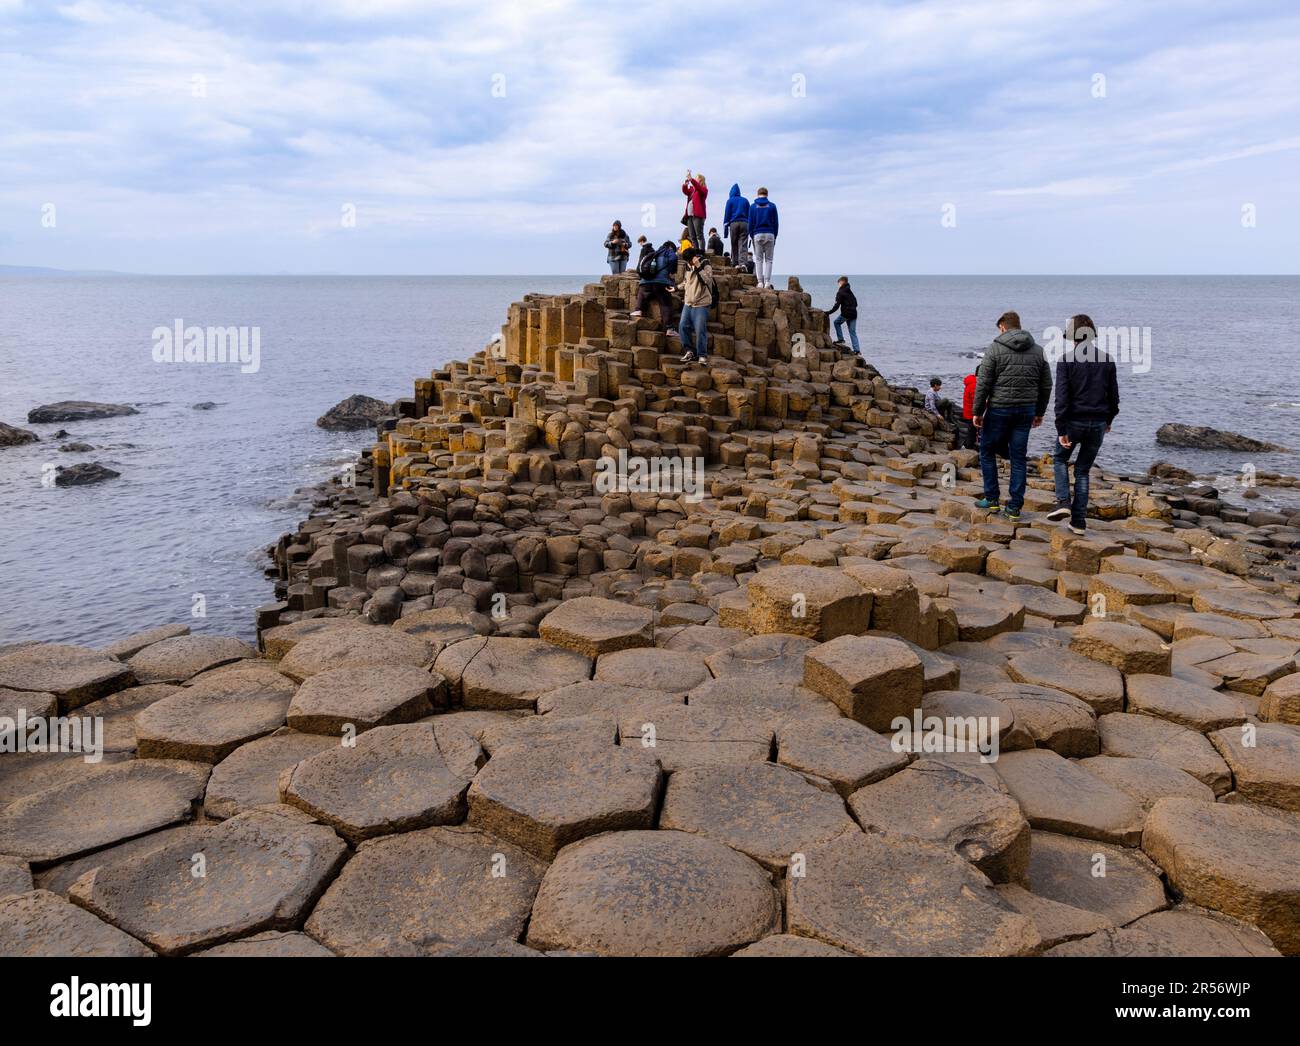 The Giant's Causeway, Bushmills, County Antrim, Northern Ireland, a famous UNESCO World Heritage Site. Stock Photo